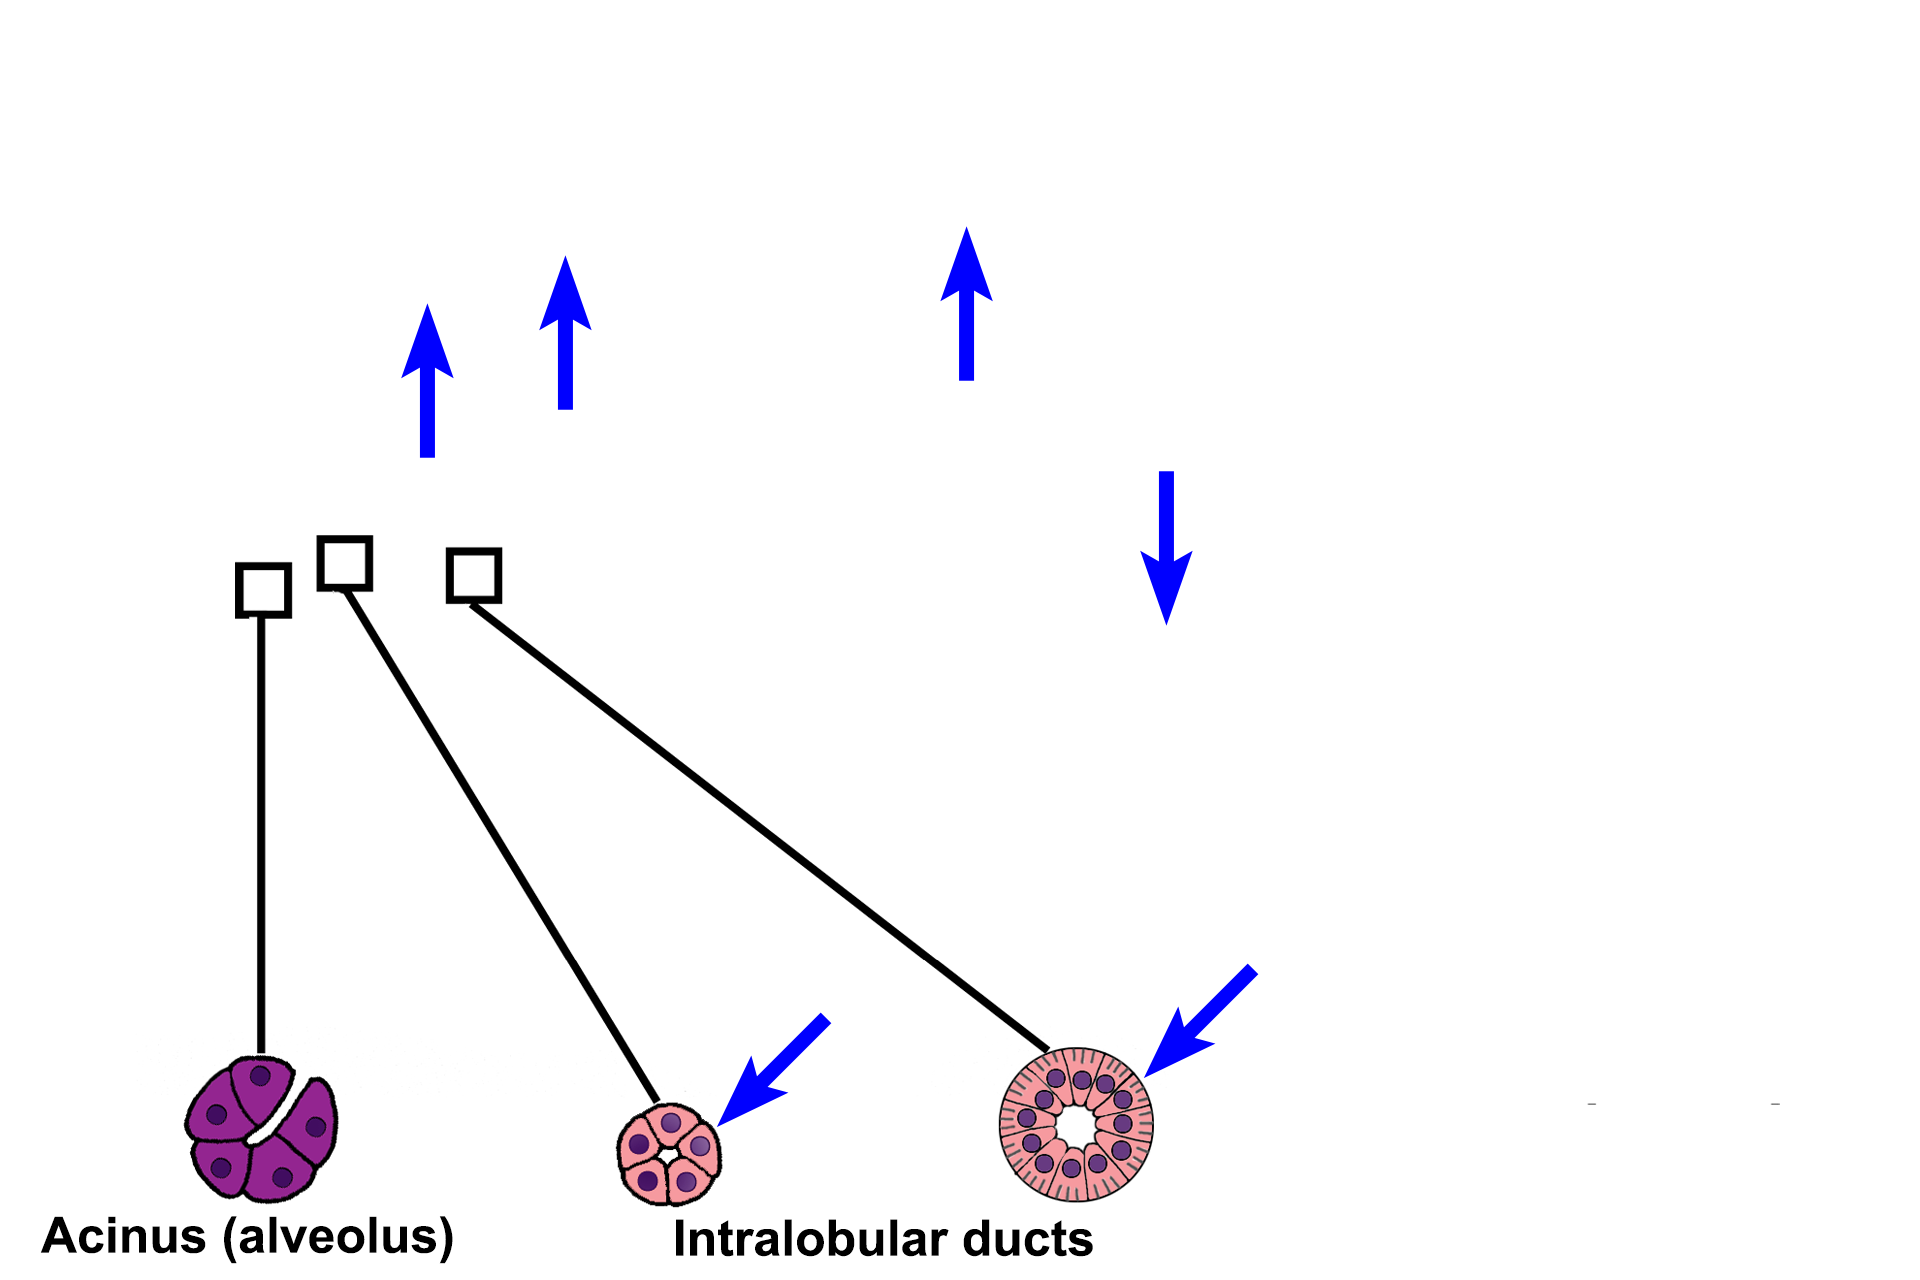 Intralobular ducts > <p>Intralobular ducts drain the secretory units and are located within a lobule.  They begin with a simple cuboidal epithelial lining.  As they join other ducts, they become larger and their epithelium increases in height, becoming simple columnar.  The two cross sections at the bottom of the illustration (blue arrows) are examples of these intralobular ducts.</p>
